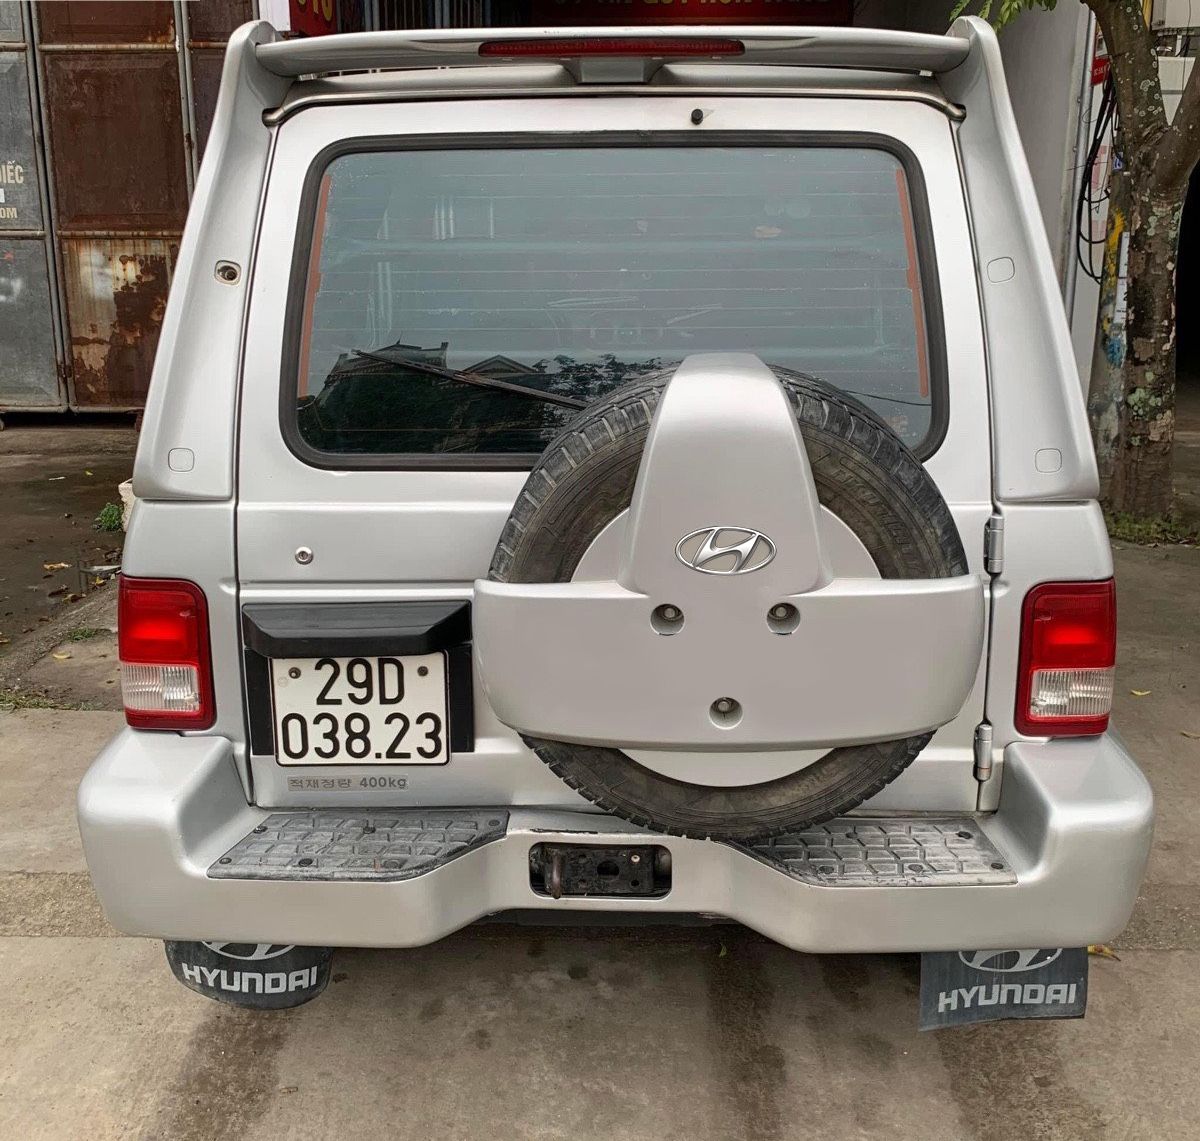 2001 HYUNDAI GALLOPER II  TURBO INTERCOOLER ENGINE WITH 4WD LOCK FULLY  FRAMED ONE ANALOGE OF MITSUBISHI PAJERO  OPTION  5 DOORS RADIOTAPE  SIDESTEPSOFFOROAD MUD TIRES 4WD WITH MANUAL CONTROL SPARE